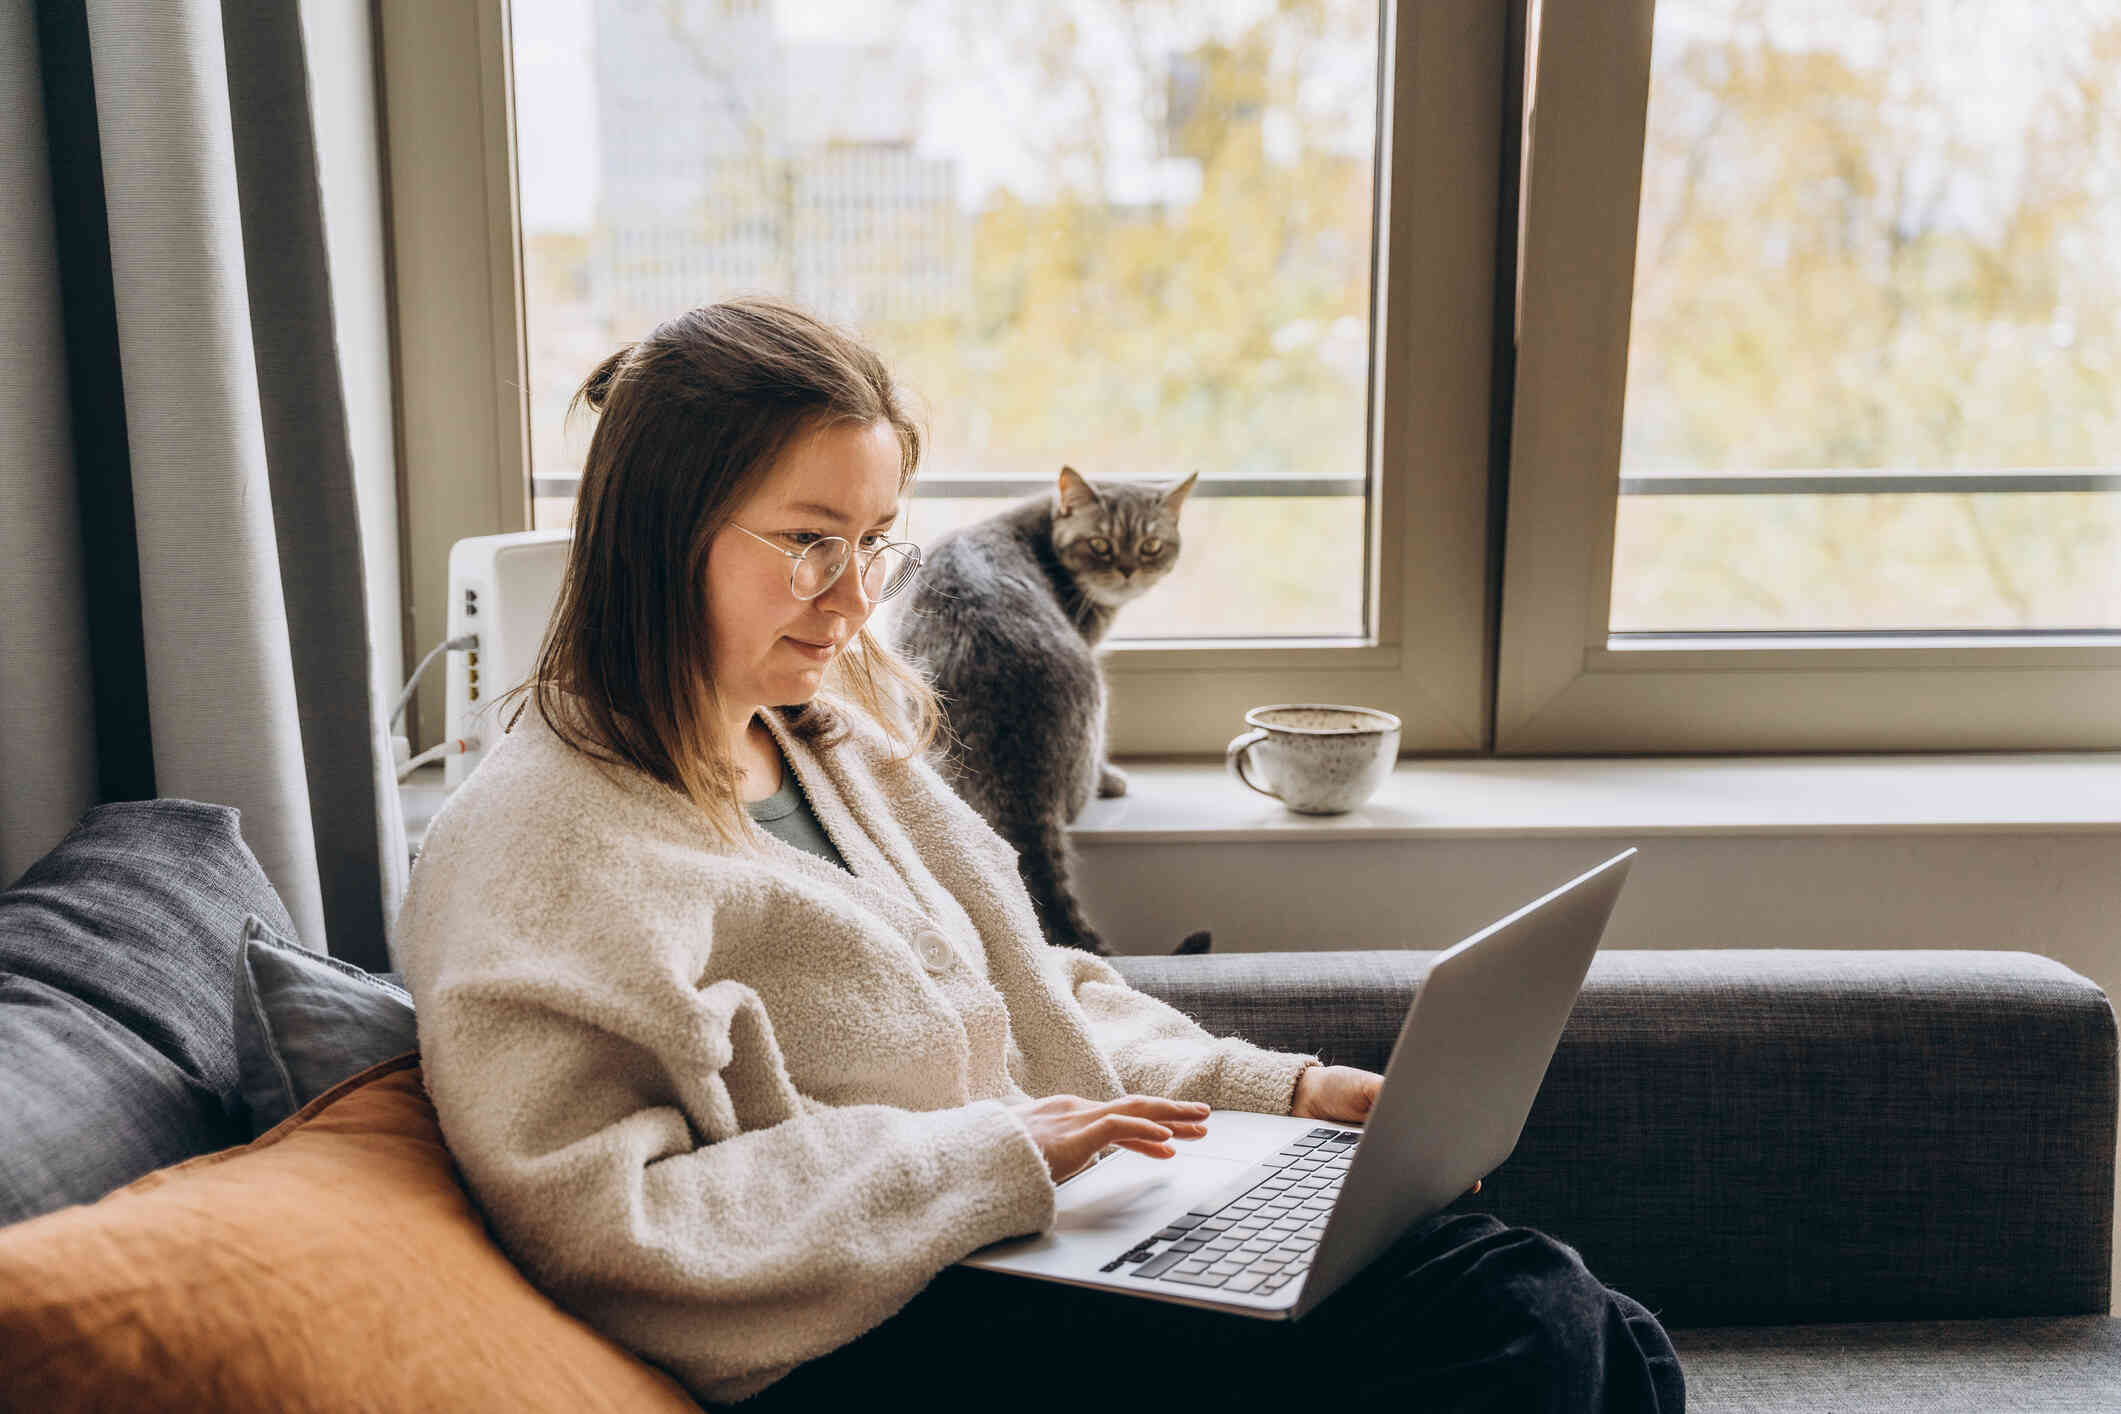 A woman in a tan sweater sits in a chair next to a window with a cup of tea and a cat while typing on the laptop in her lap.